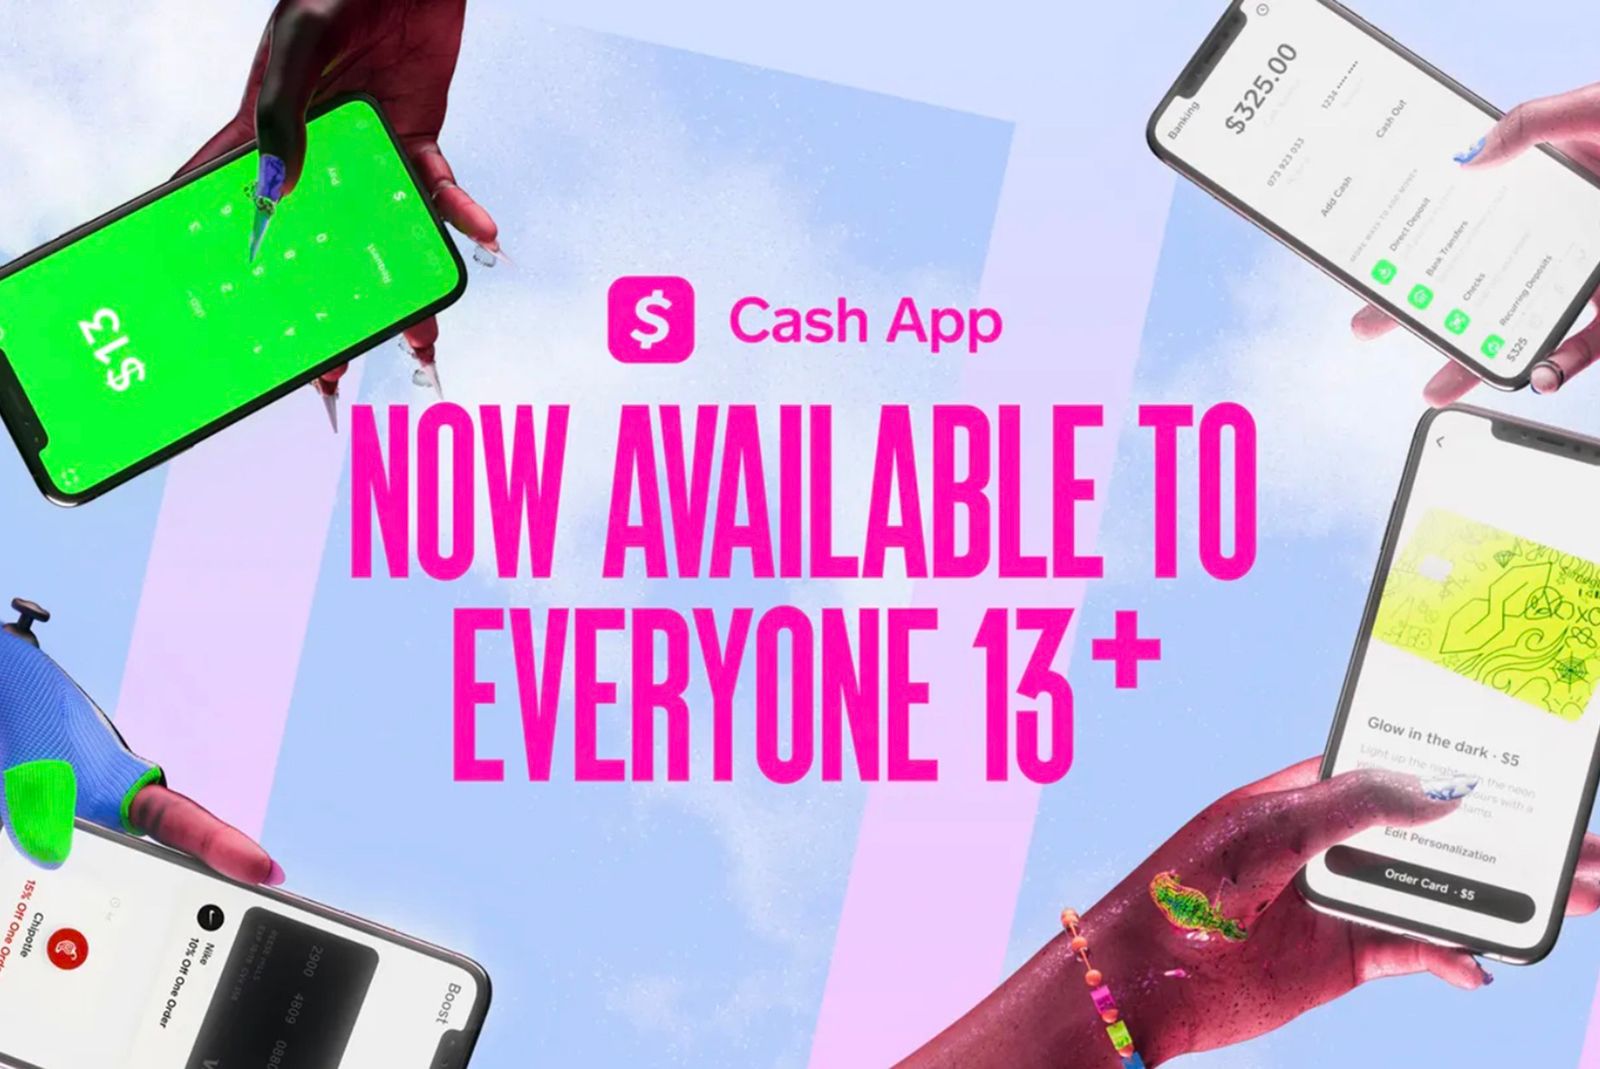 Beating Venmo, Cash App starts letting teens use its payment services photo 1